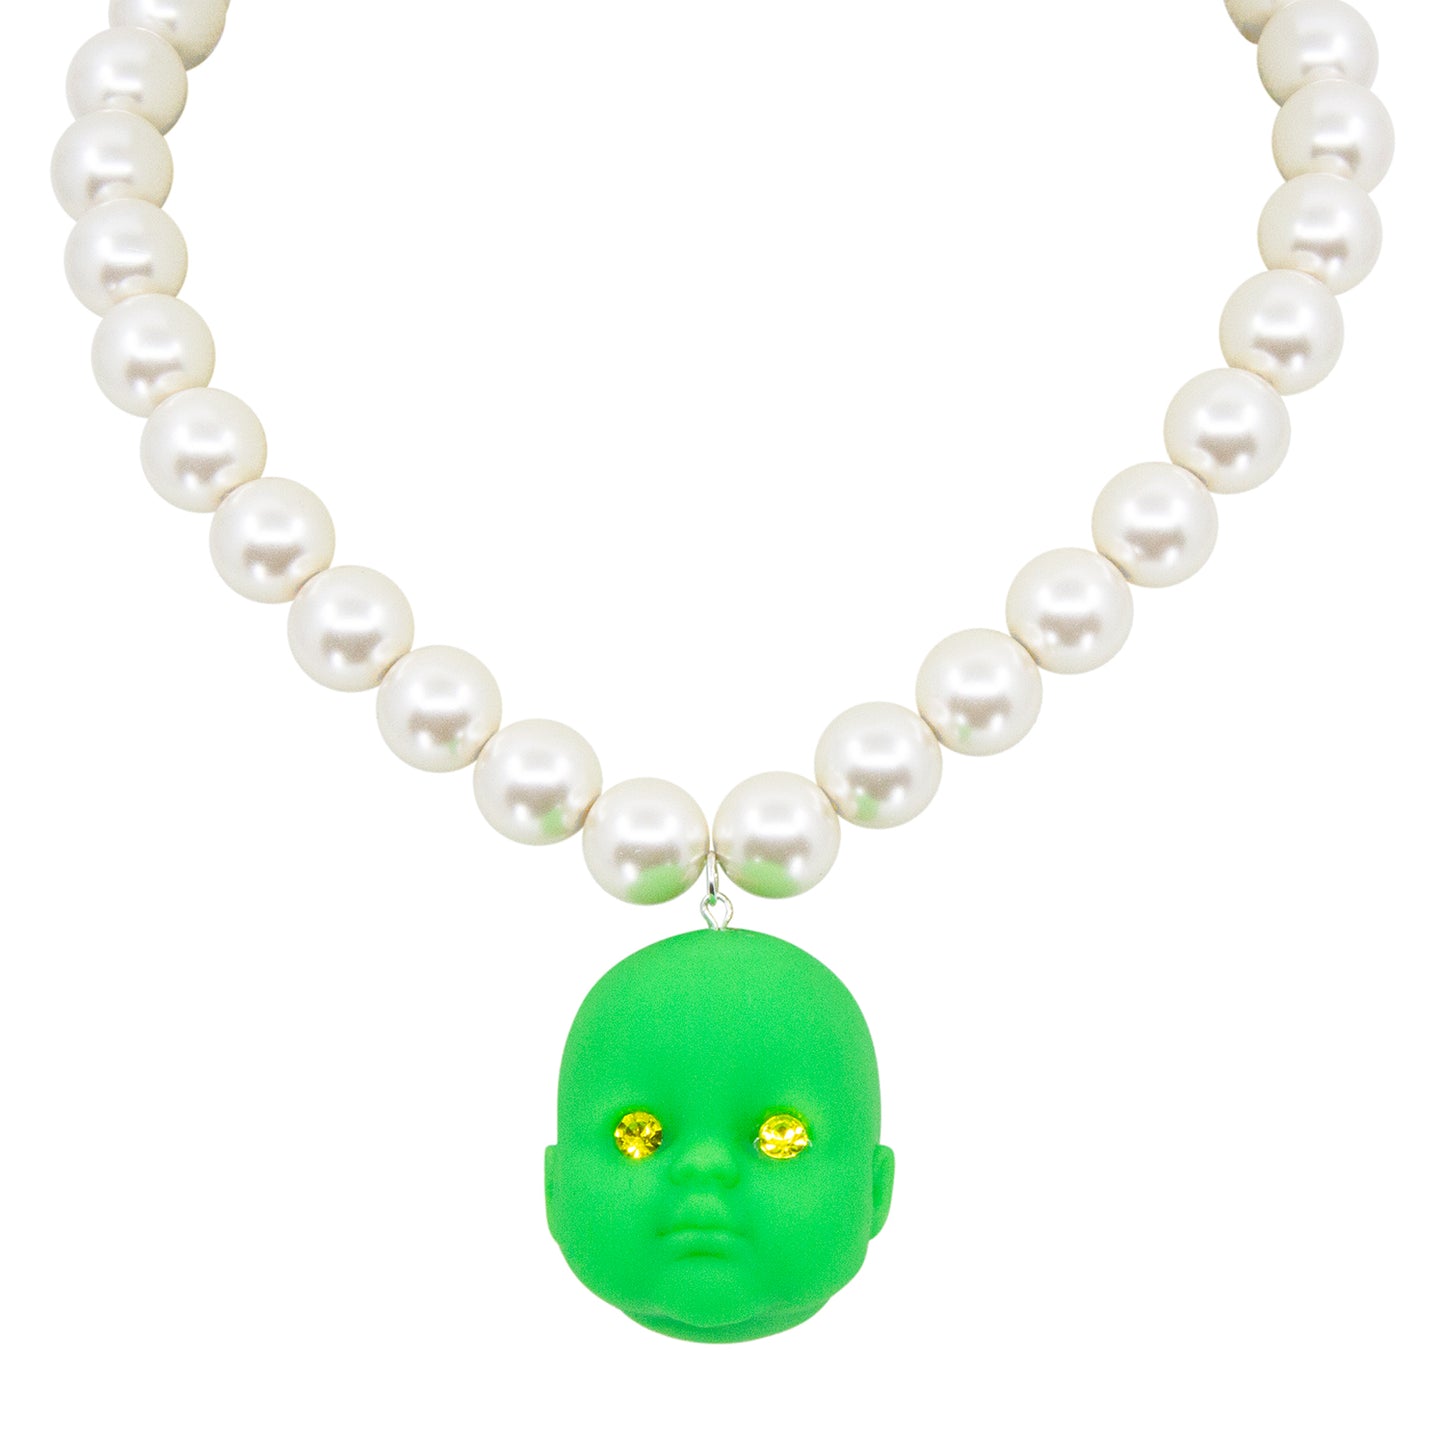 Key Lime Pie Baby Doll Pearl Necklace